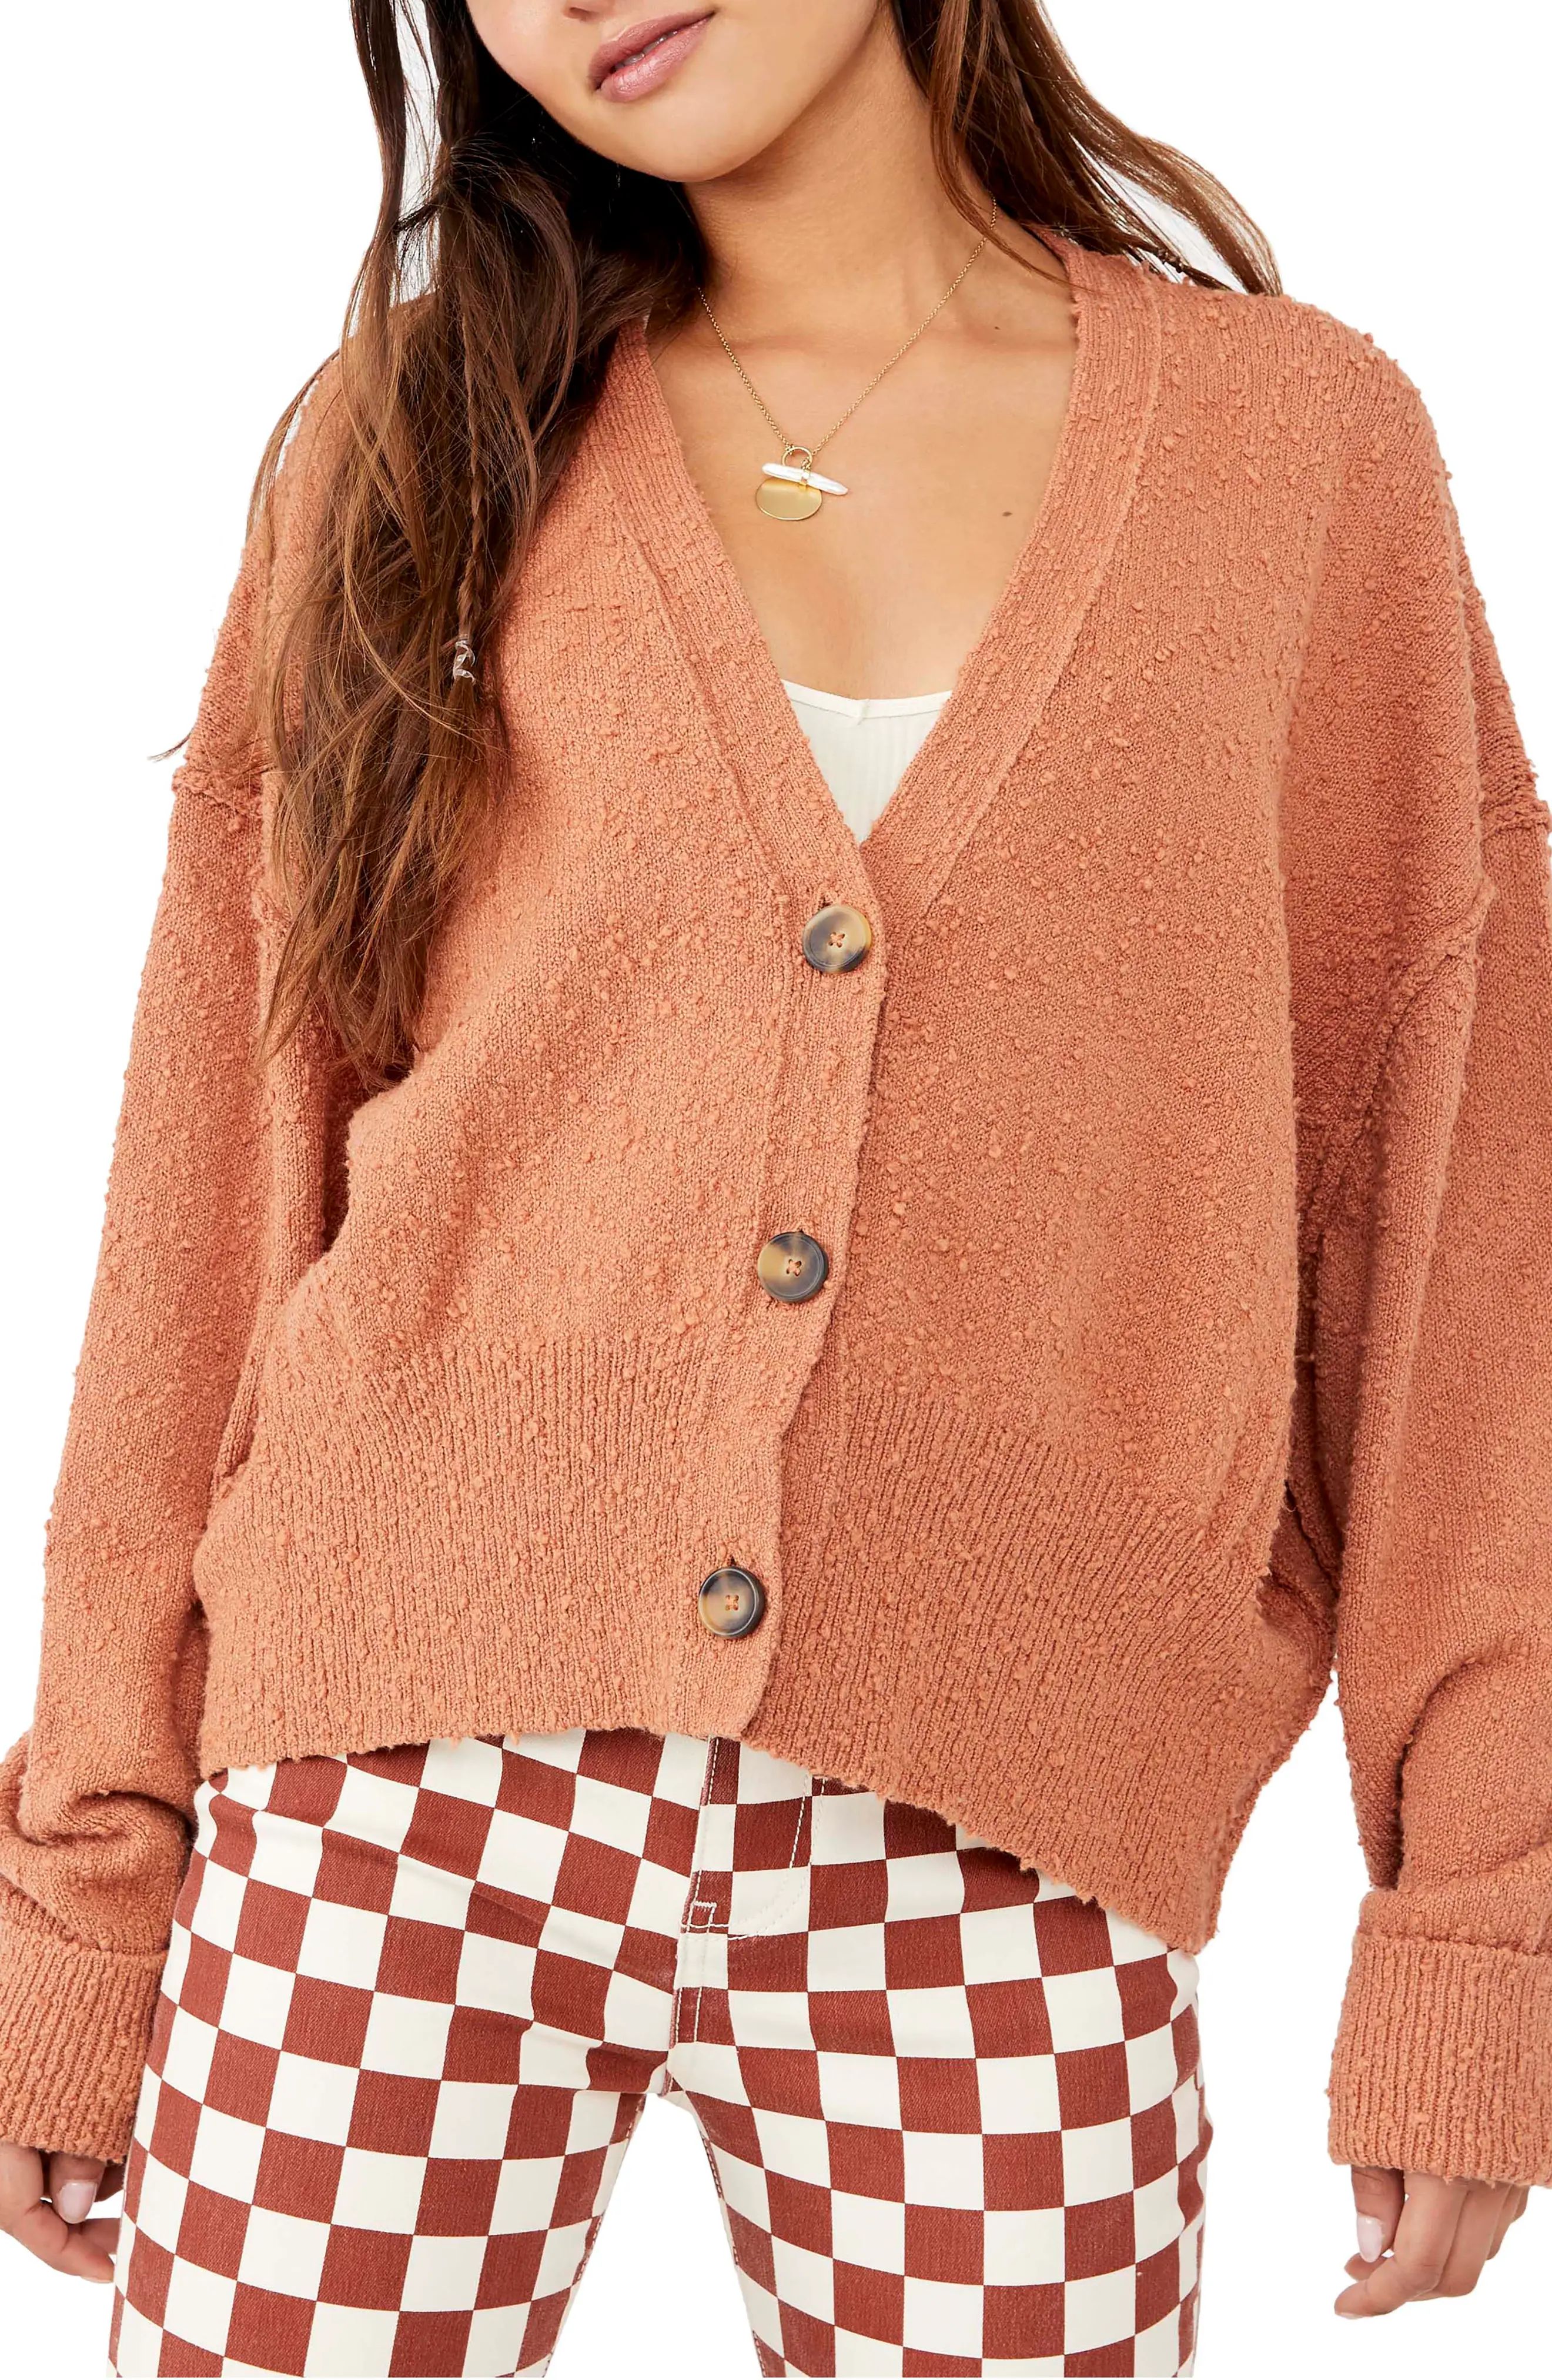 Free People Found My Friend Cardigan in Doe at Nordstrom, Size Medium | Nordstrom